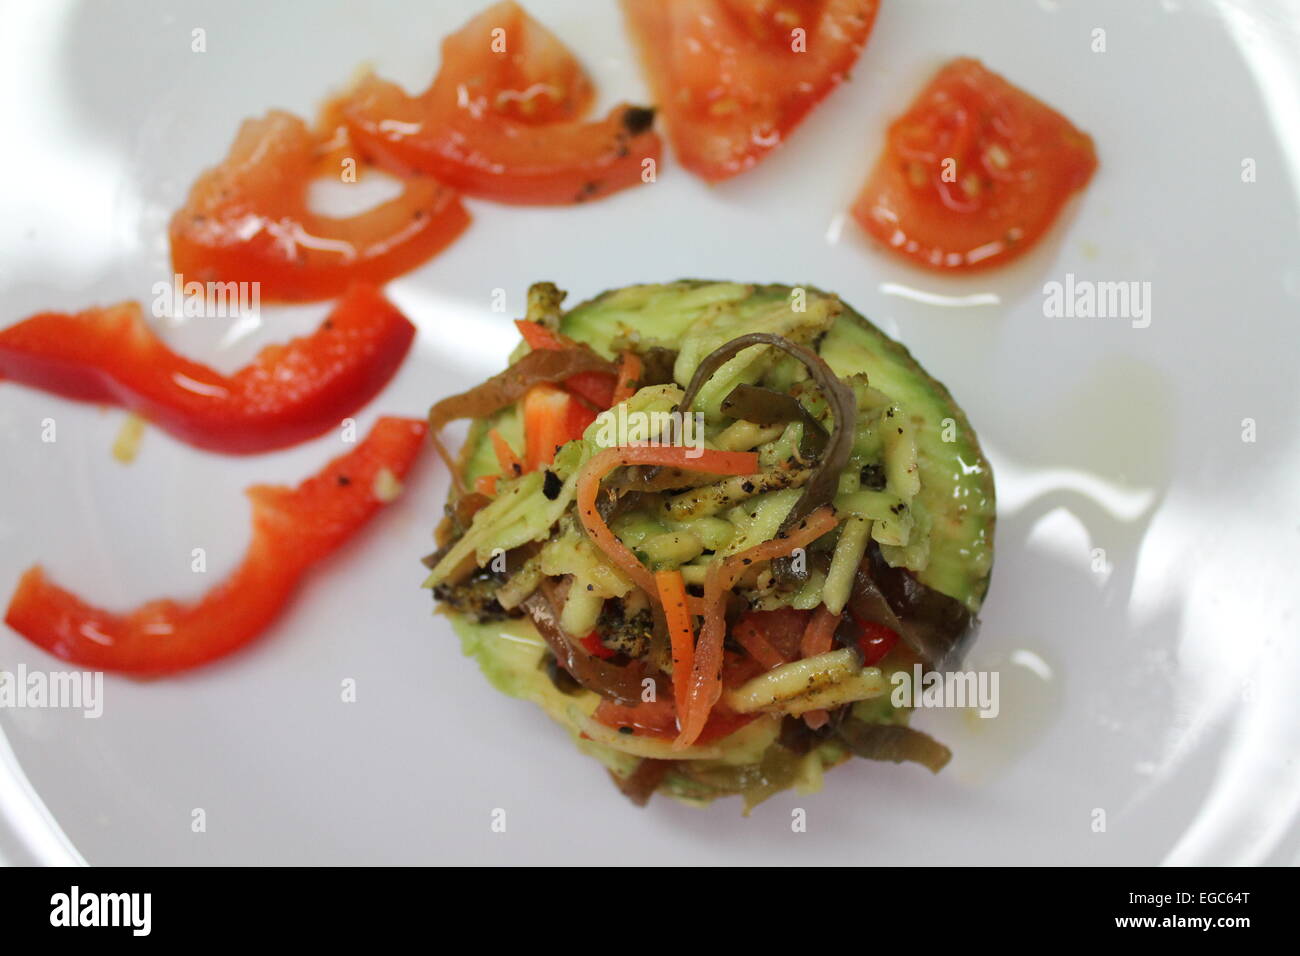 appetizing fresh easy cook snack from avocado lay on plate decorated with slices of pulp pepper and tomato Stock Photo